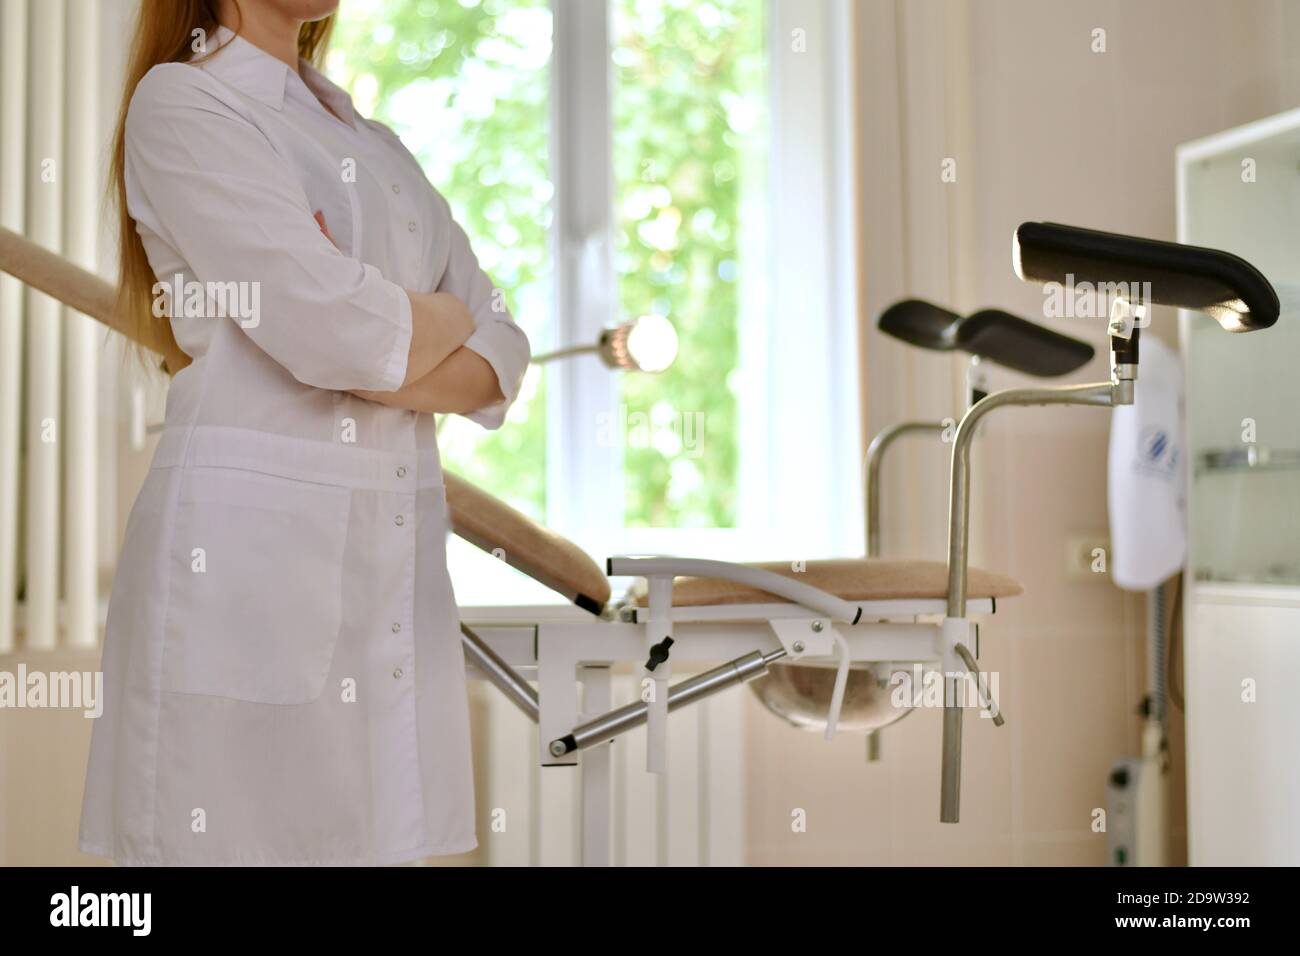 A doctor in white uniform with folded hands. Stands in profile in front of a gynecological chair with footrests.  Stock Photo